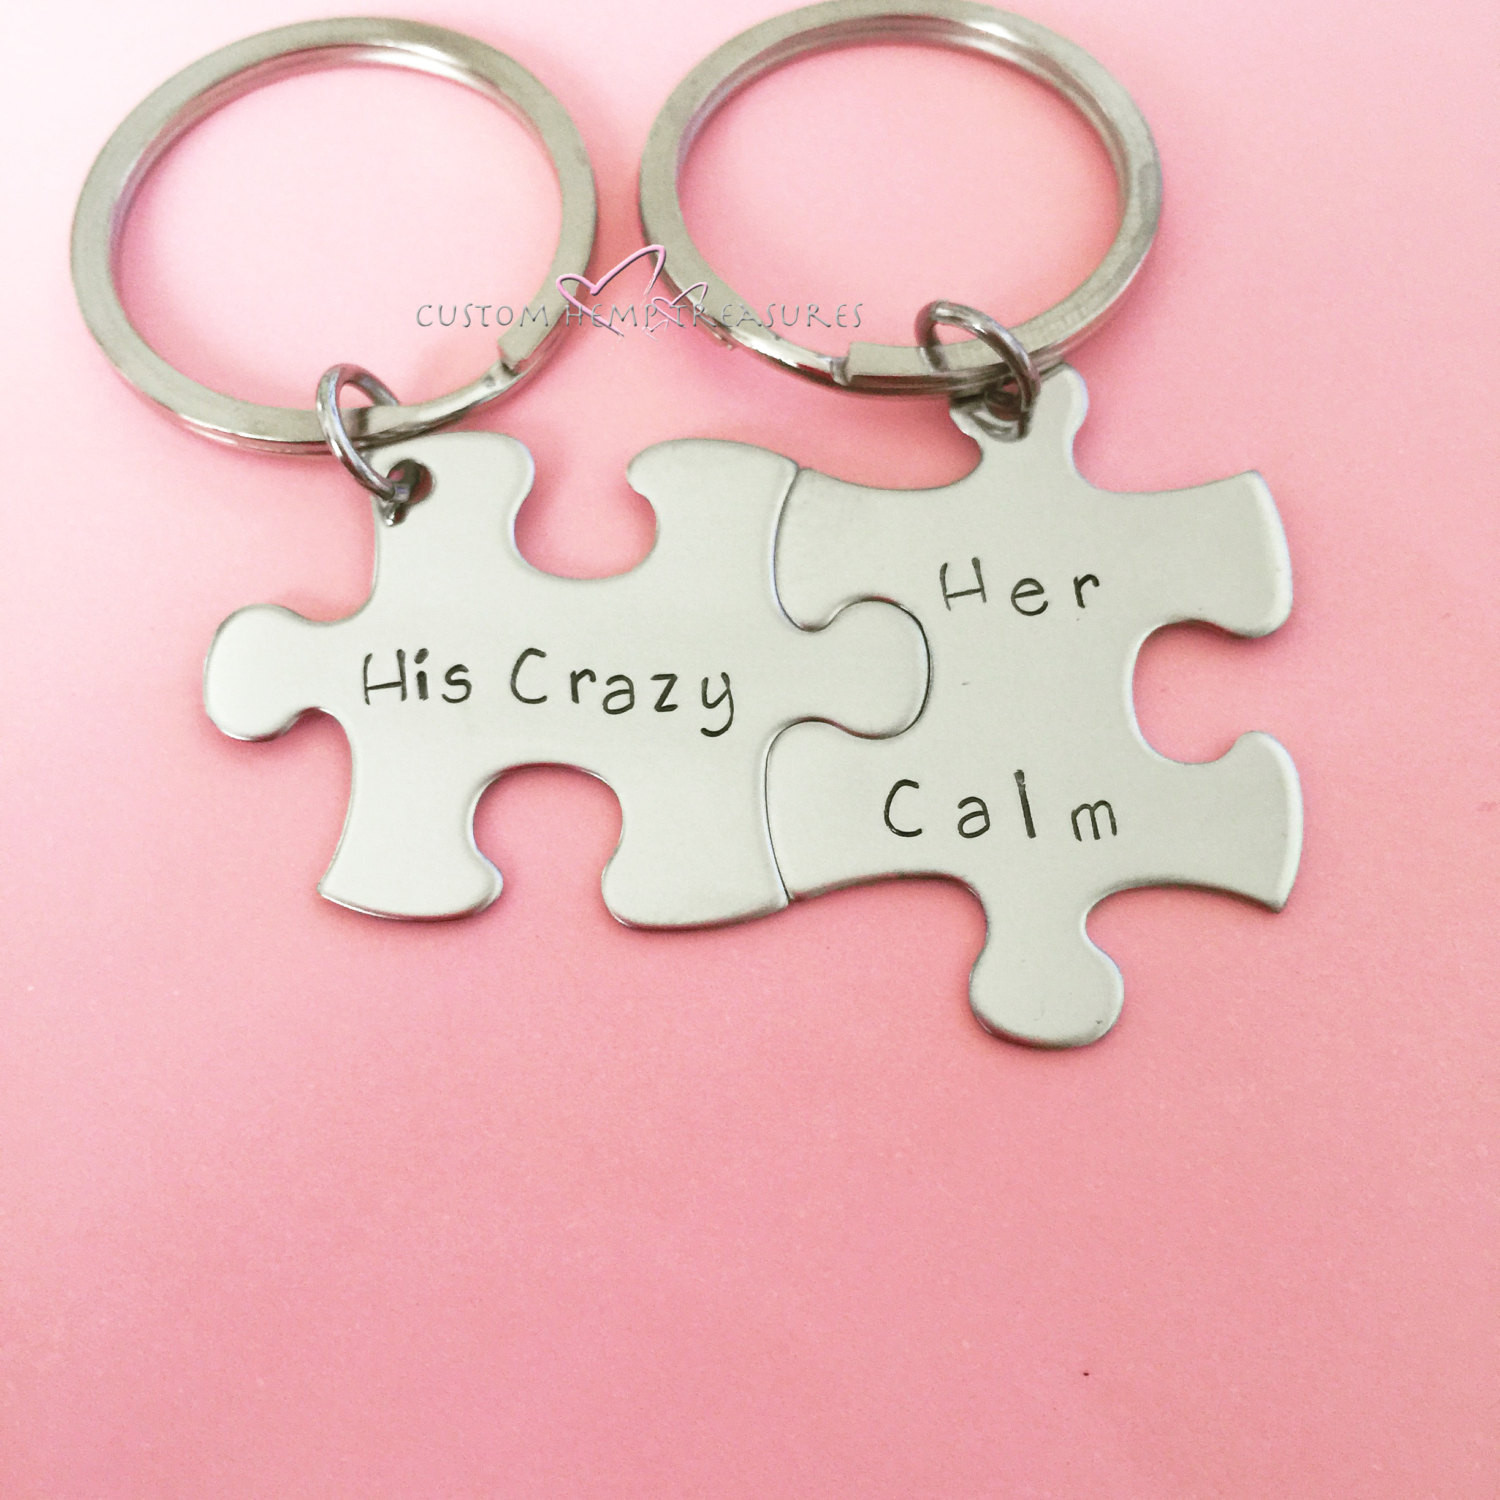 Couple Gift Ideas For Her
 His Crazy Her Calm Couples Keychains anniversary t t